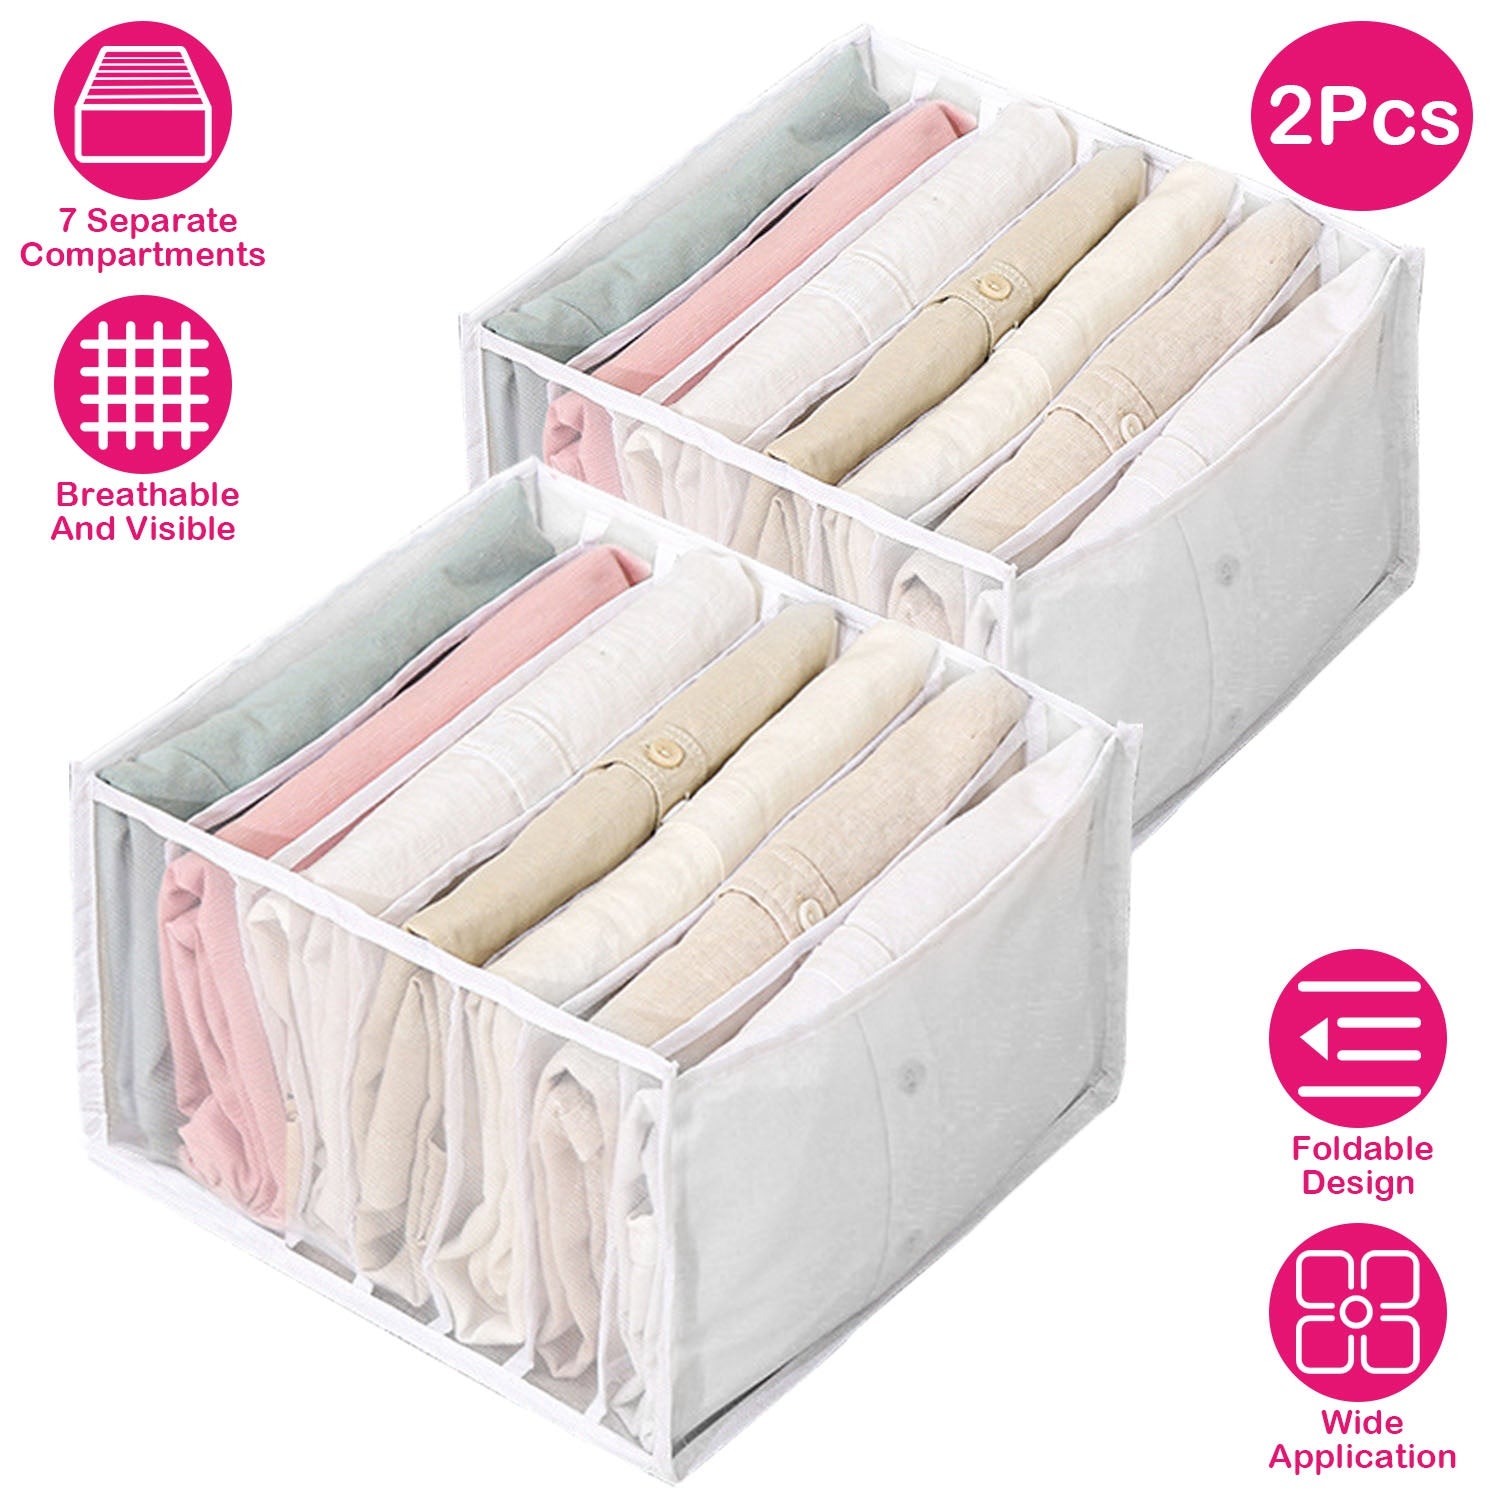 7 Grid 2pcs Wardrobe Clothes Organizer Foldable Visible Closet Organizers  and Storage Portable Storage Containers for Jeans,baby Cloth 